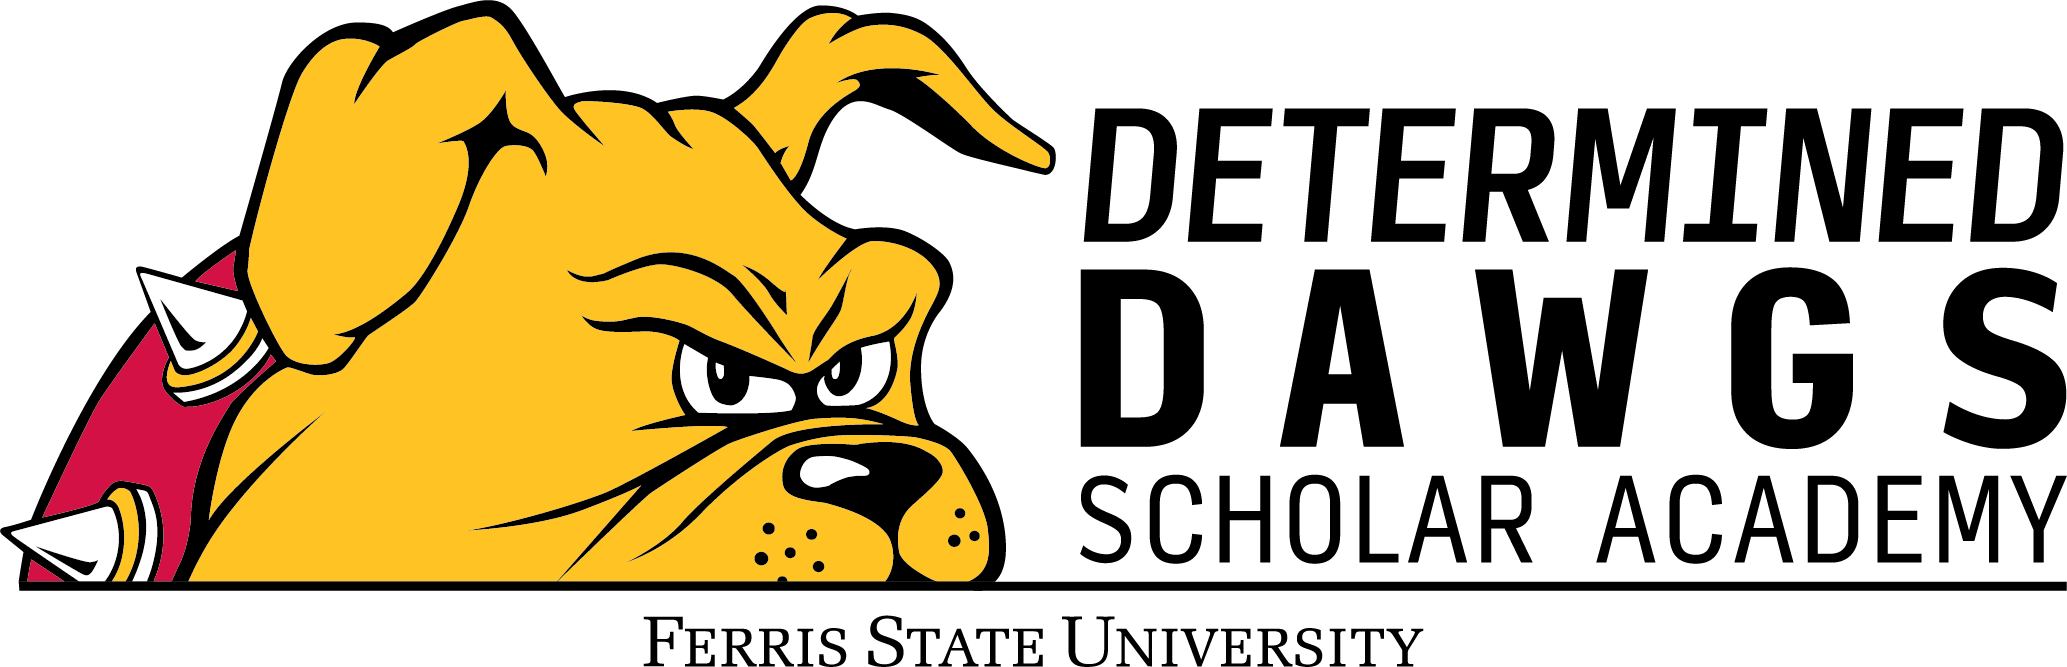 Bullldog mascot with the words Determined Dawgs Scholar Academy to the right of the dog and Ferris State University centered below